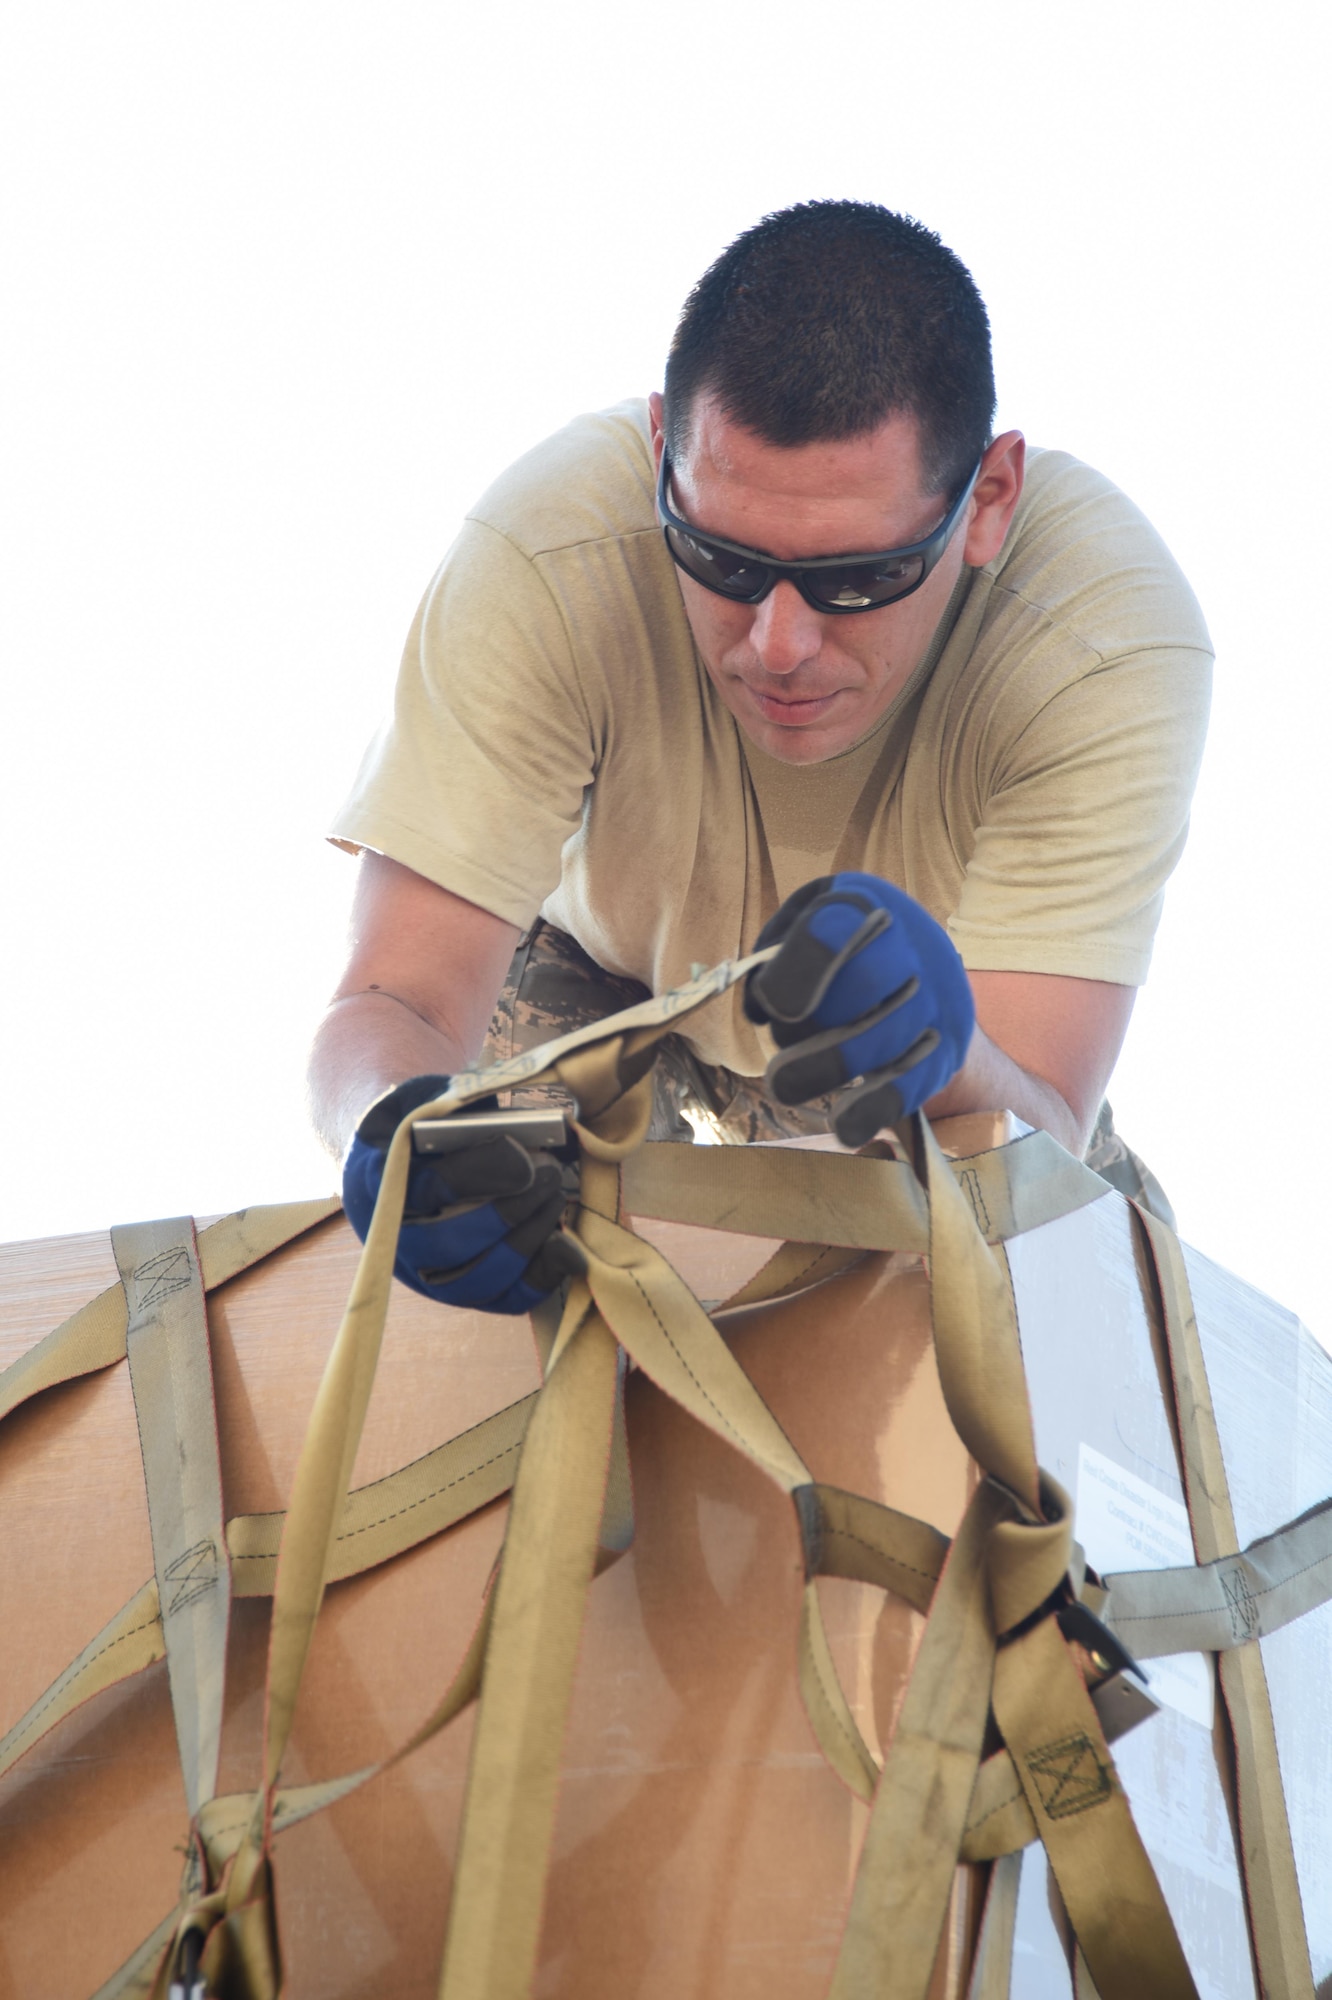 Air Force Tech. Sgt. Lucas Ortega, 73rd Aerial Port Squadron cargo supervisor, adjusts webbing on a pallet used to secure American Red Cross supplies before their transport August 29, 2017, at Naval Air Station Fort Worth Joint Reserve Base, Texas, in support of Hurricane Harvey relief efforts. There were 90,000 lbs. of supplies, included blankets and cots, sent as part of the Defense Support of Civil Authority. Department of Defense provides medium and heavy lift rotary wing assets, along with ground transportation, to move personnel, commodities and equipment within Texas. (U.S. Air Force photo by Ms. Julie Briden-Garcia)